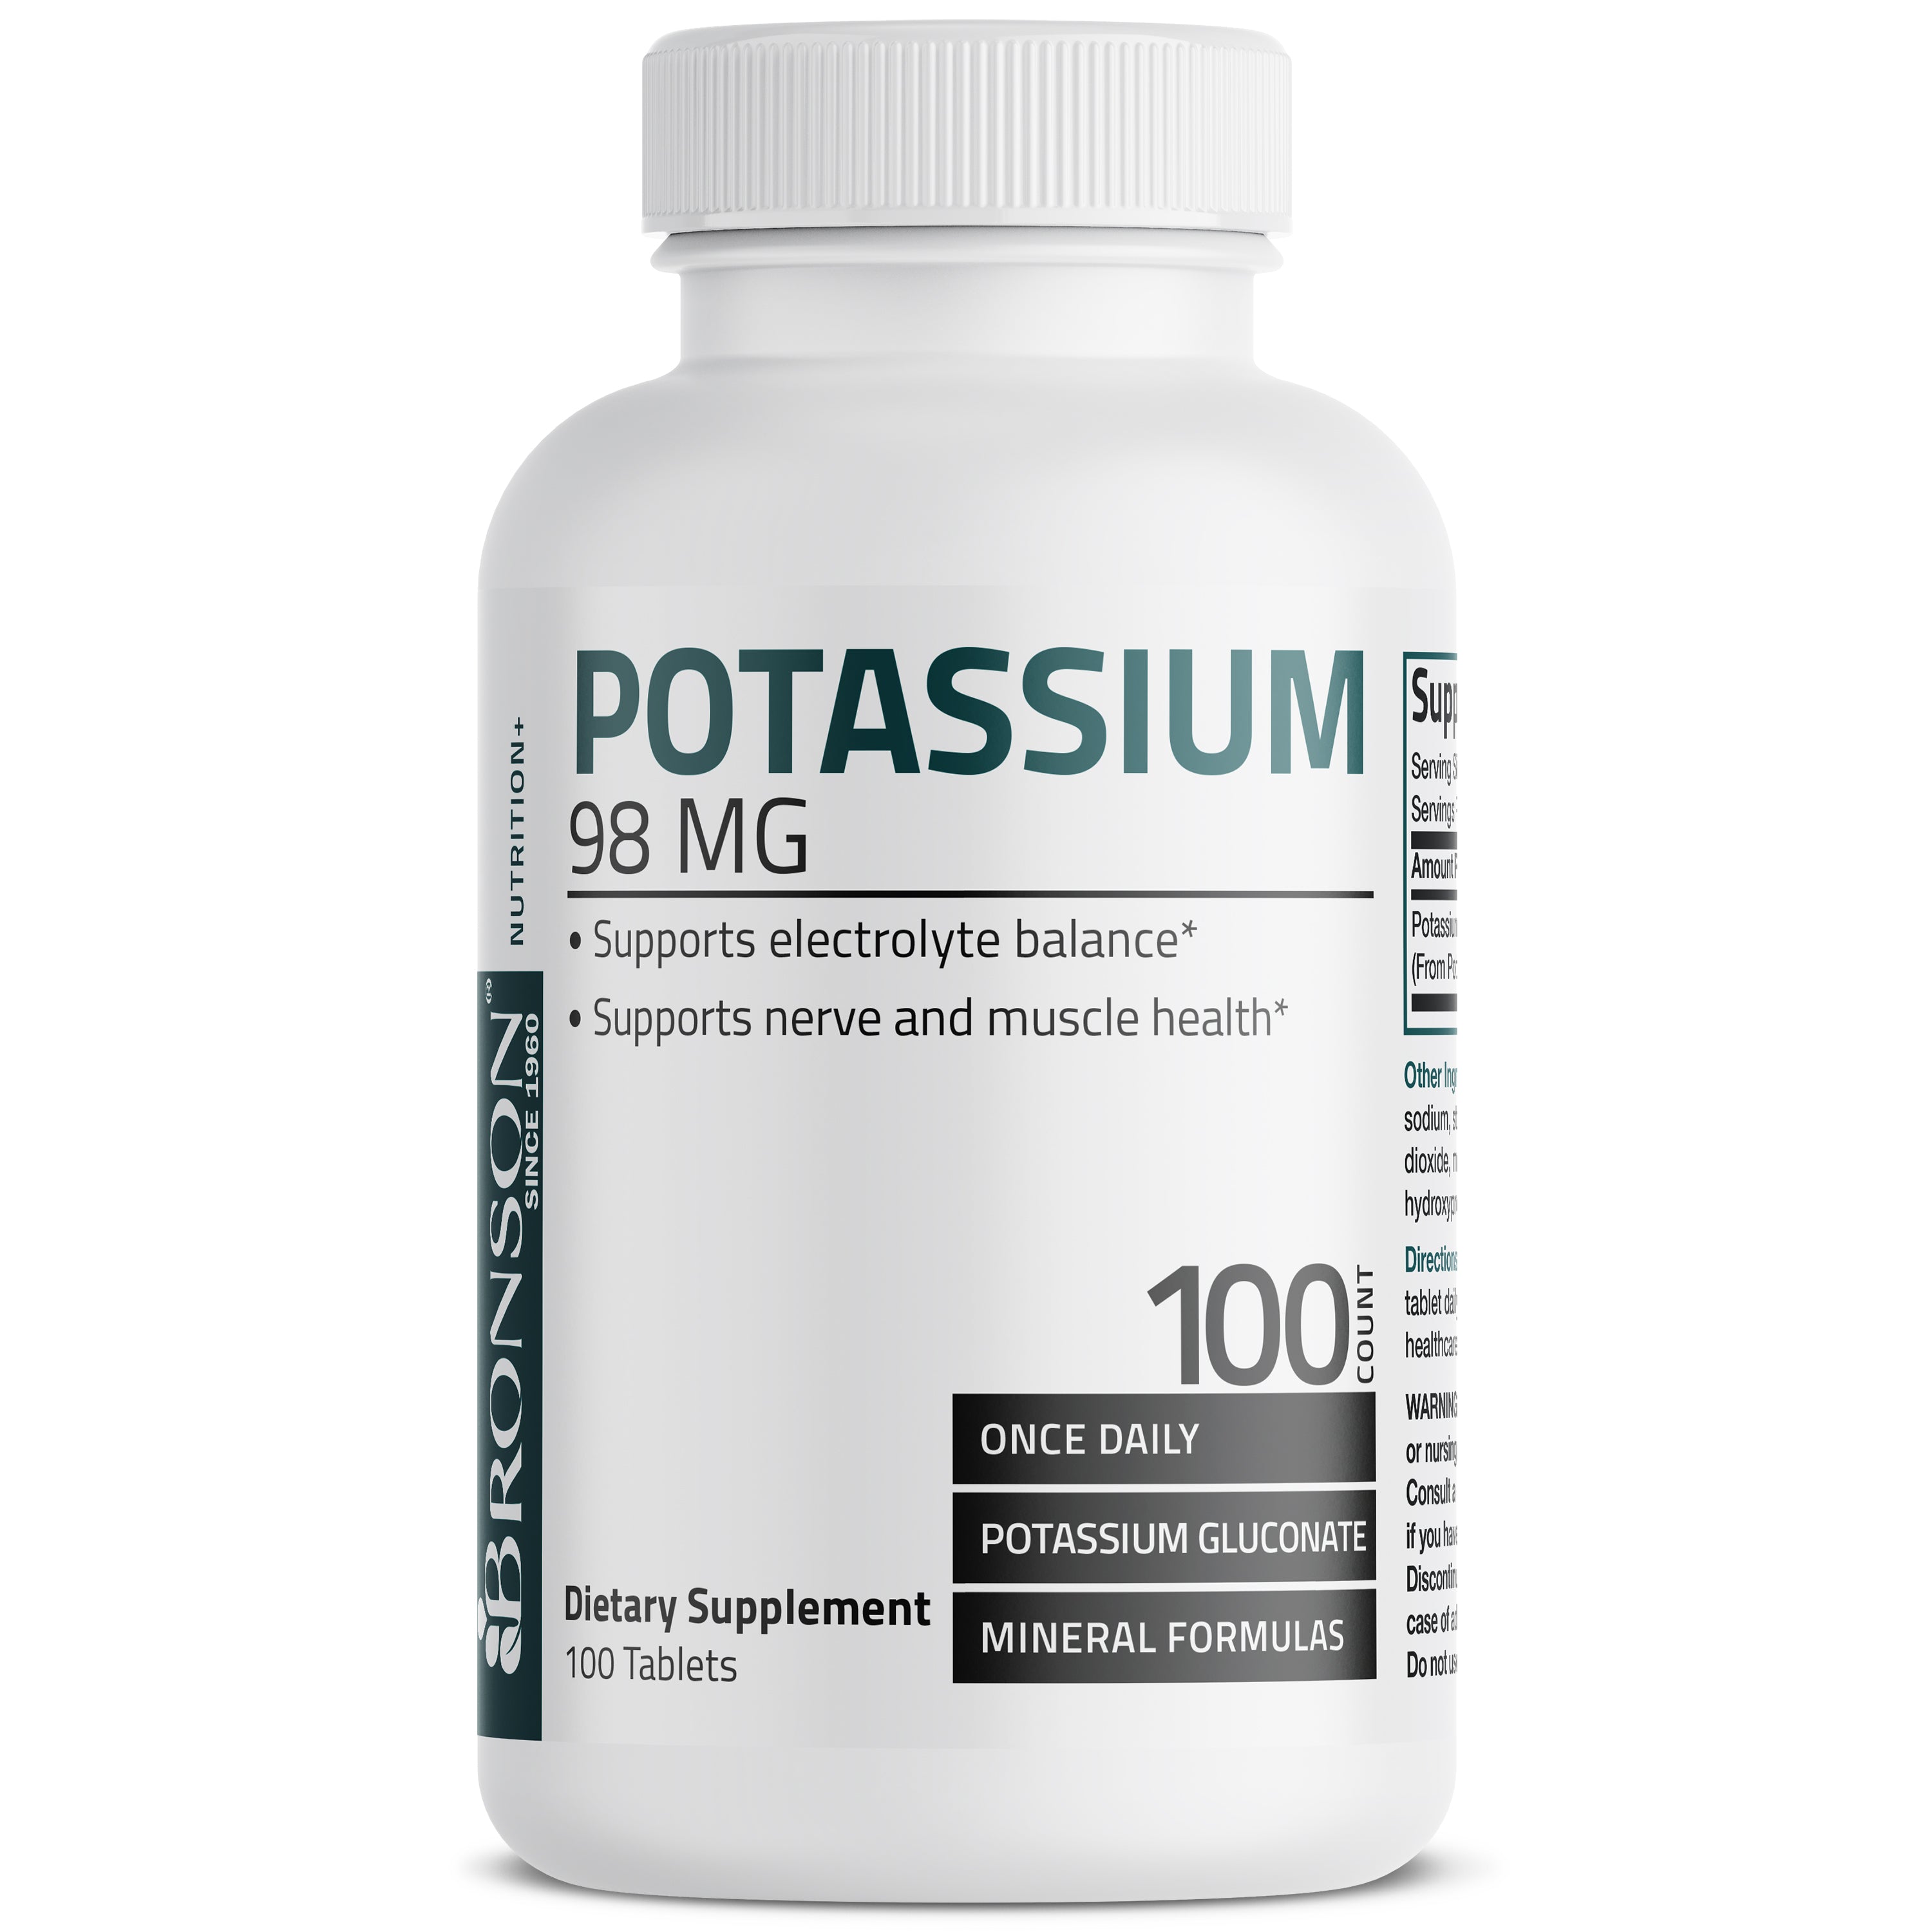 Potassium Gluconate - 98 mg - 100 Tablets view 1 of 4